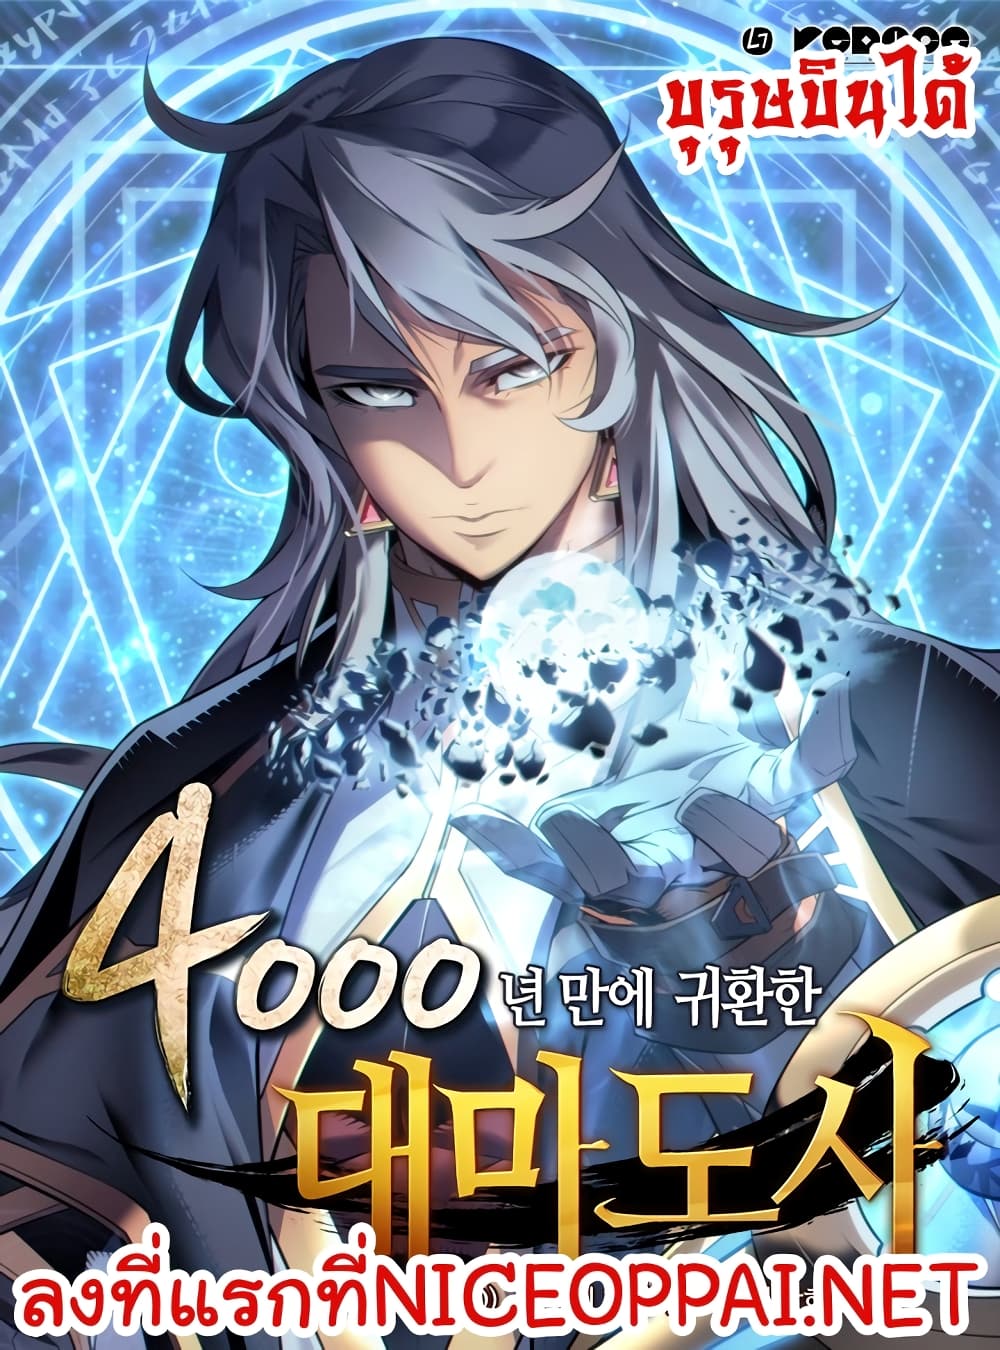 The Great Mage Returns After 4000 Years 34 (1)